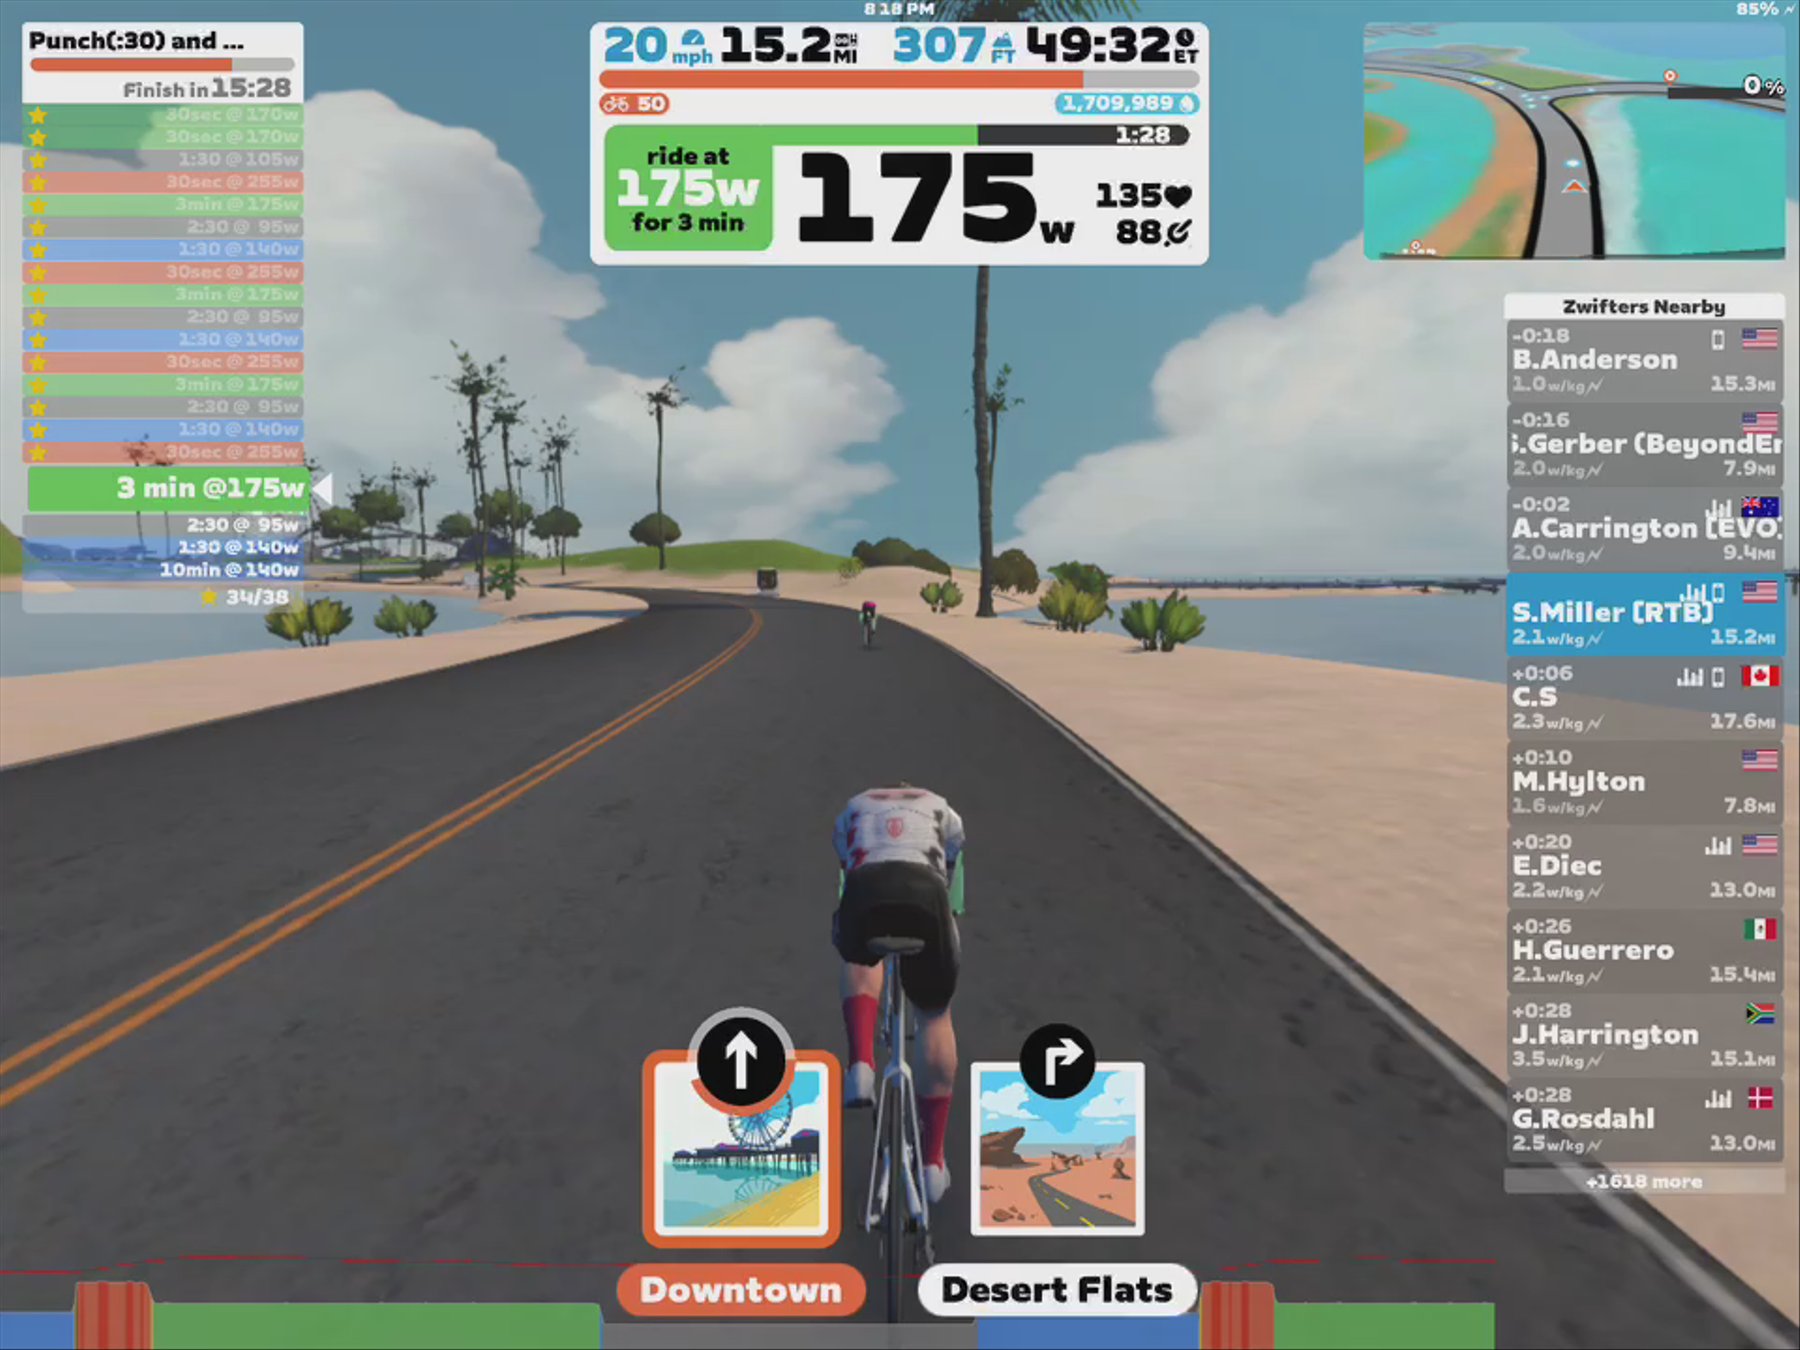 Zwift - Punch(:30) and Settle a3a in Watopia